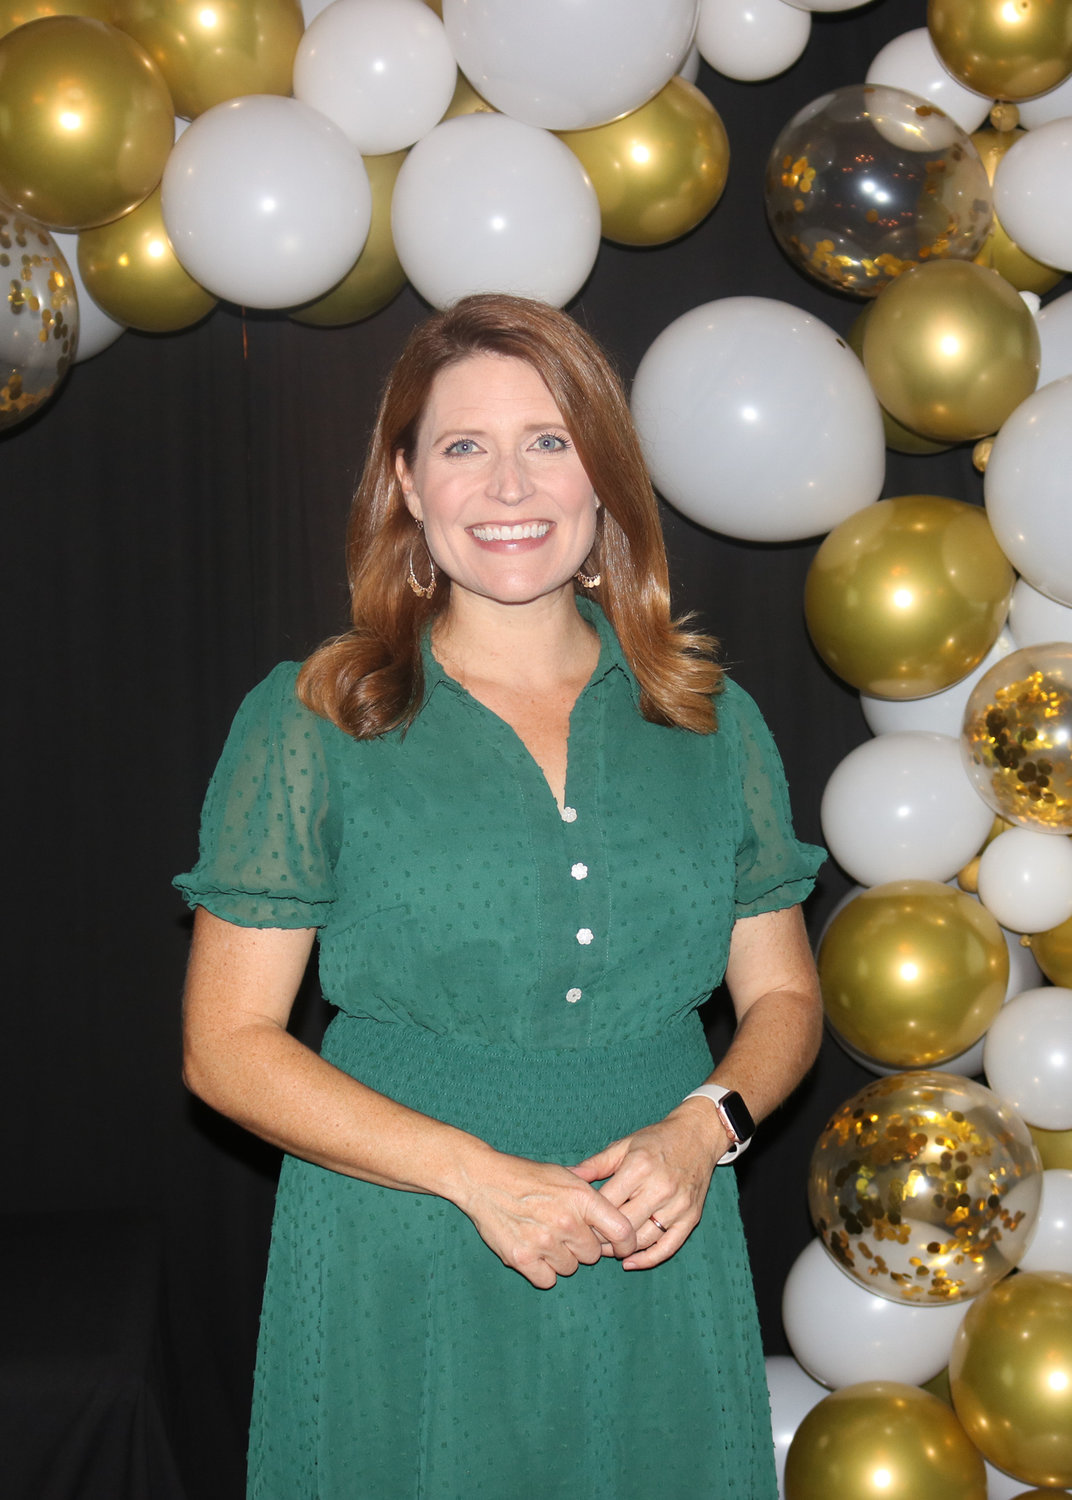 Laura Kirtley Smith, Crawfordsville native and host of WRTV Channel 6 Spotlight, was the keynote speaker at the annual dinner and awards banquet sponsored by the Crawfordsville/Montgomery County Chamber of Commerce.